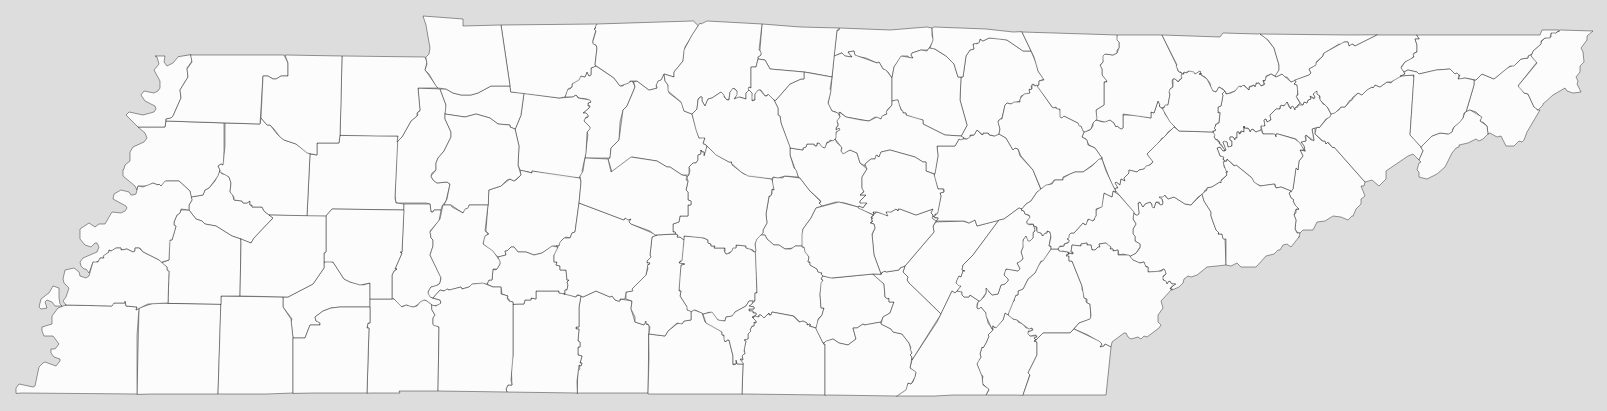 Blank Tennessee County Map